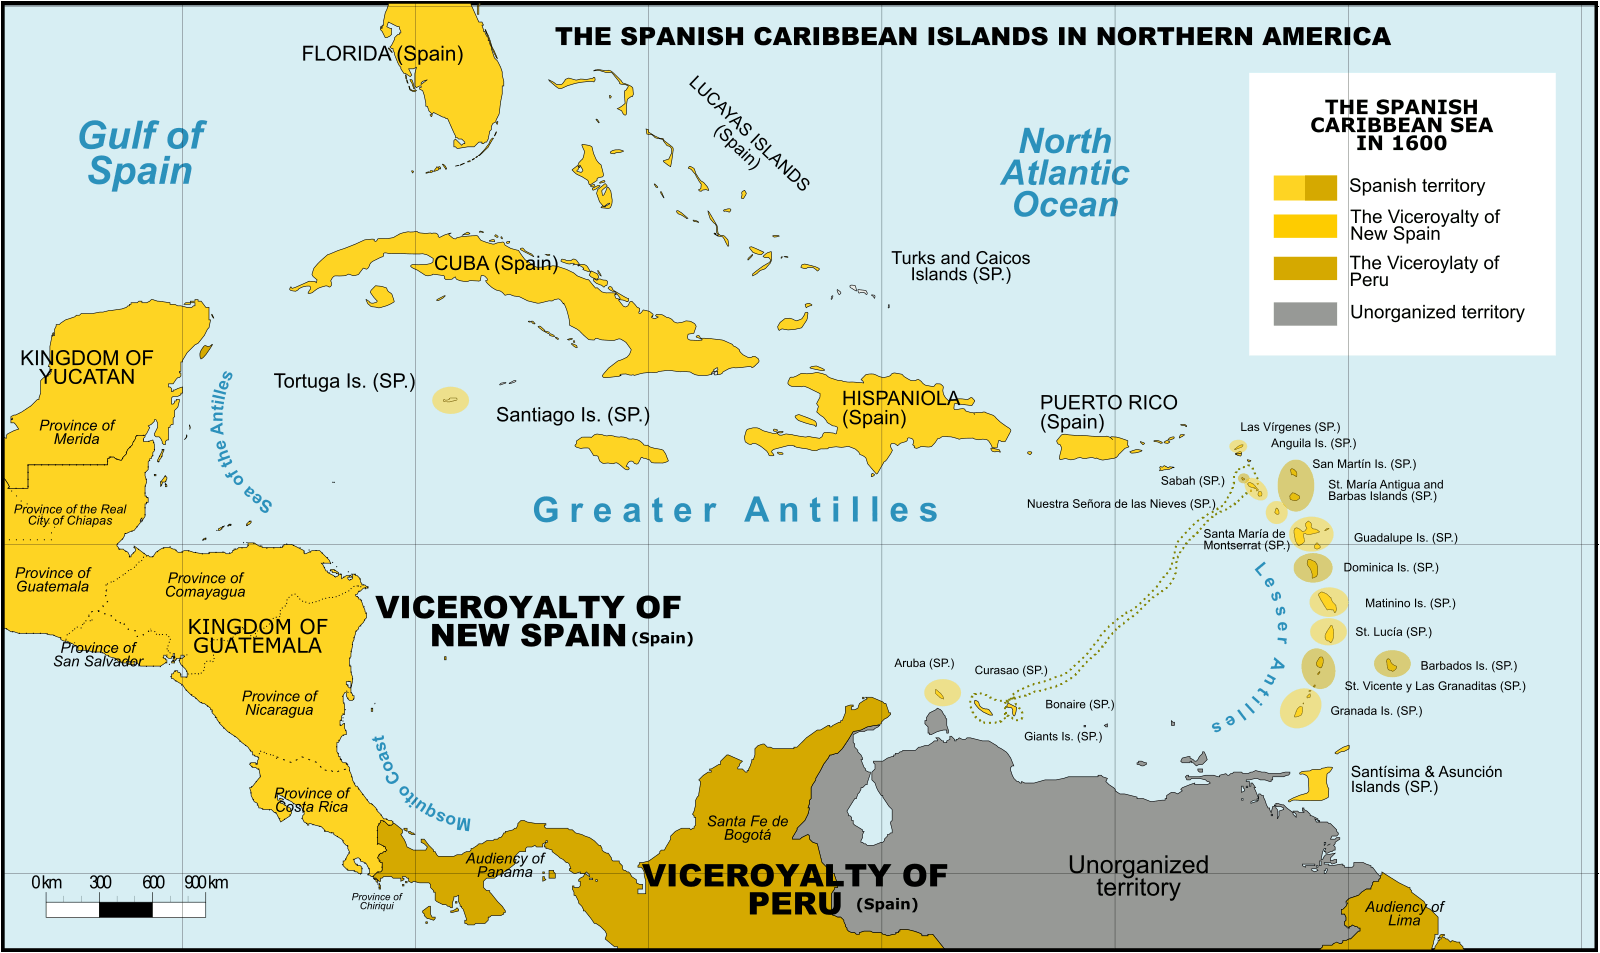 The Caribbean Sea, West Indies